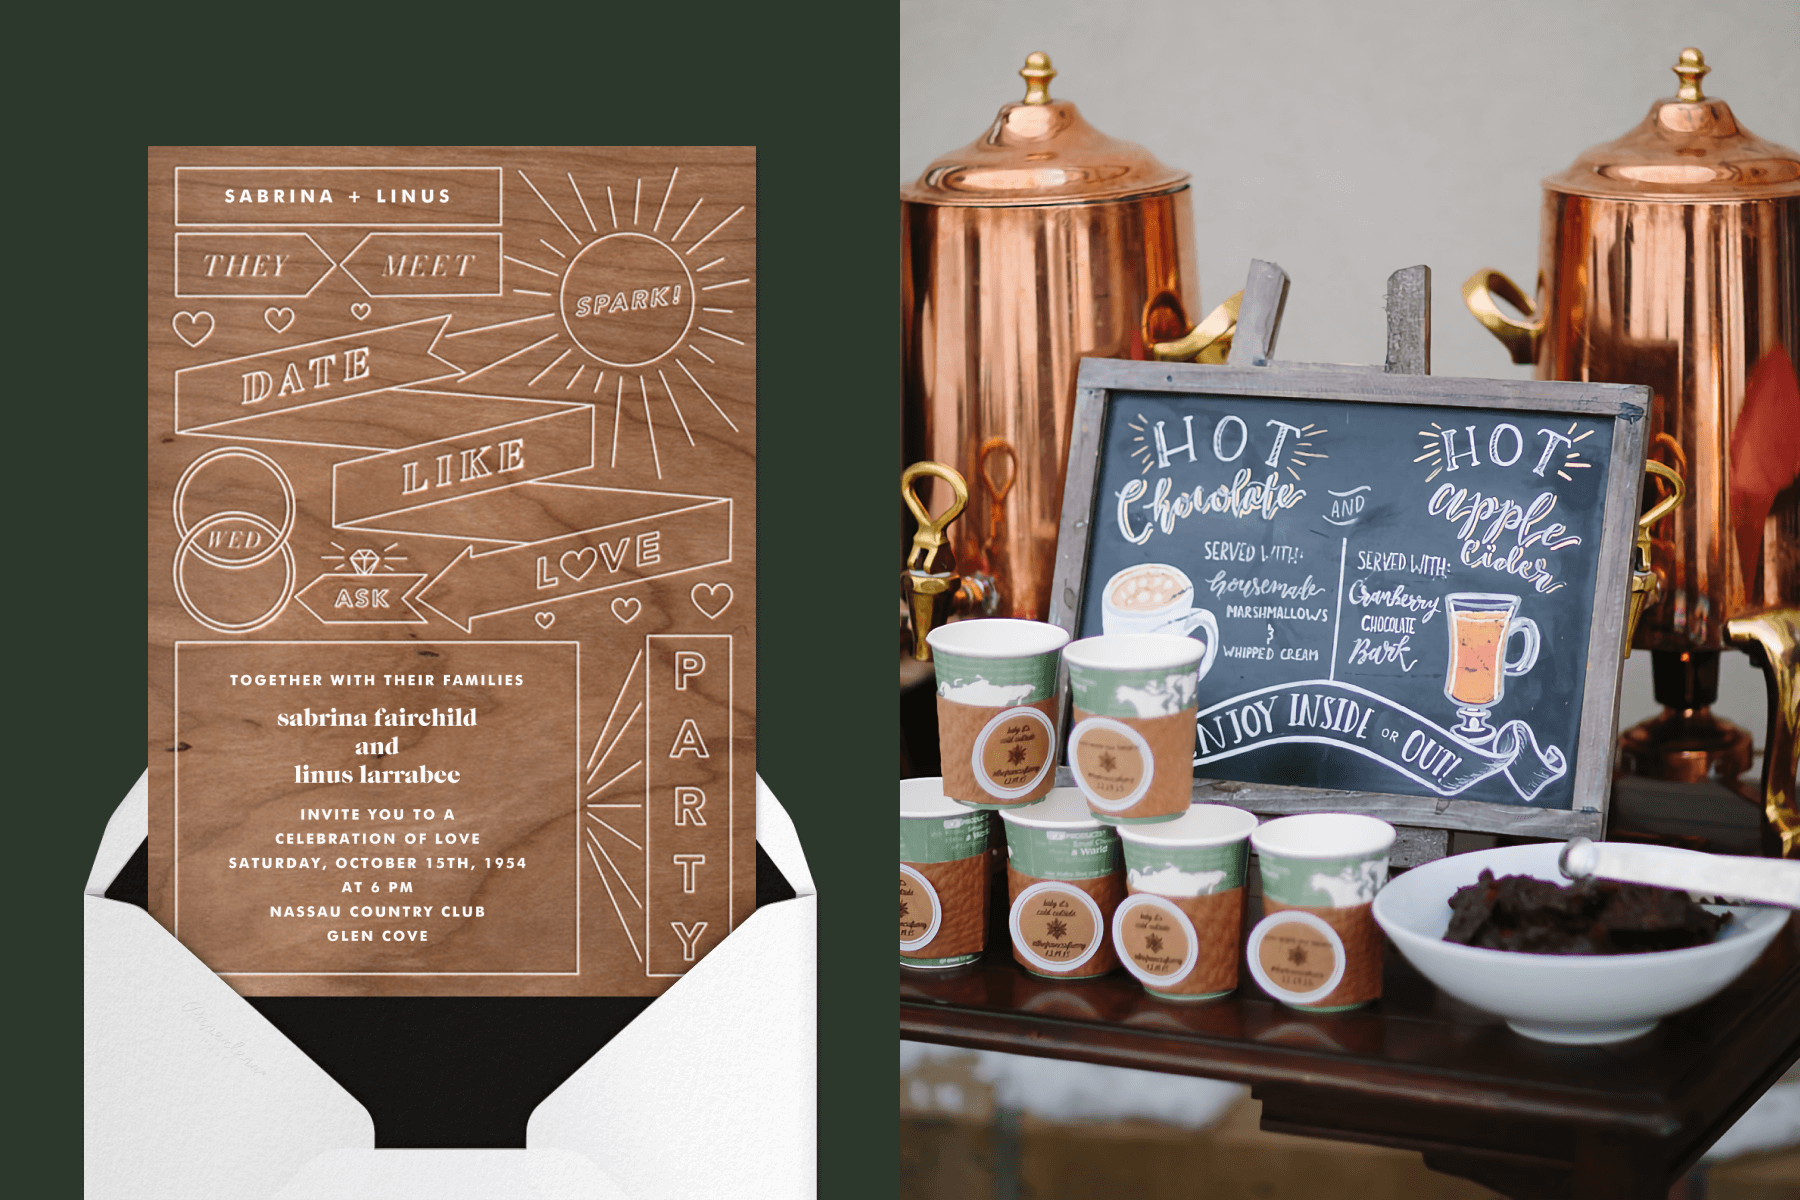 Left: A wood grain wedding invitation with etched details. Right: A hot chocolate bar with a chalkboard and copper drink dispensers.